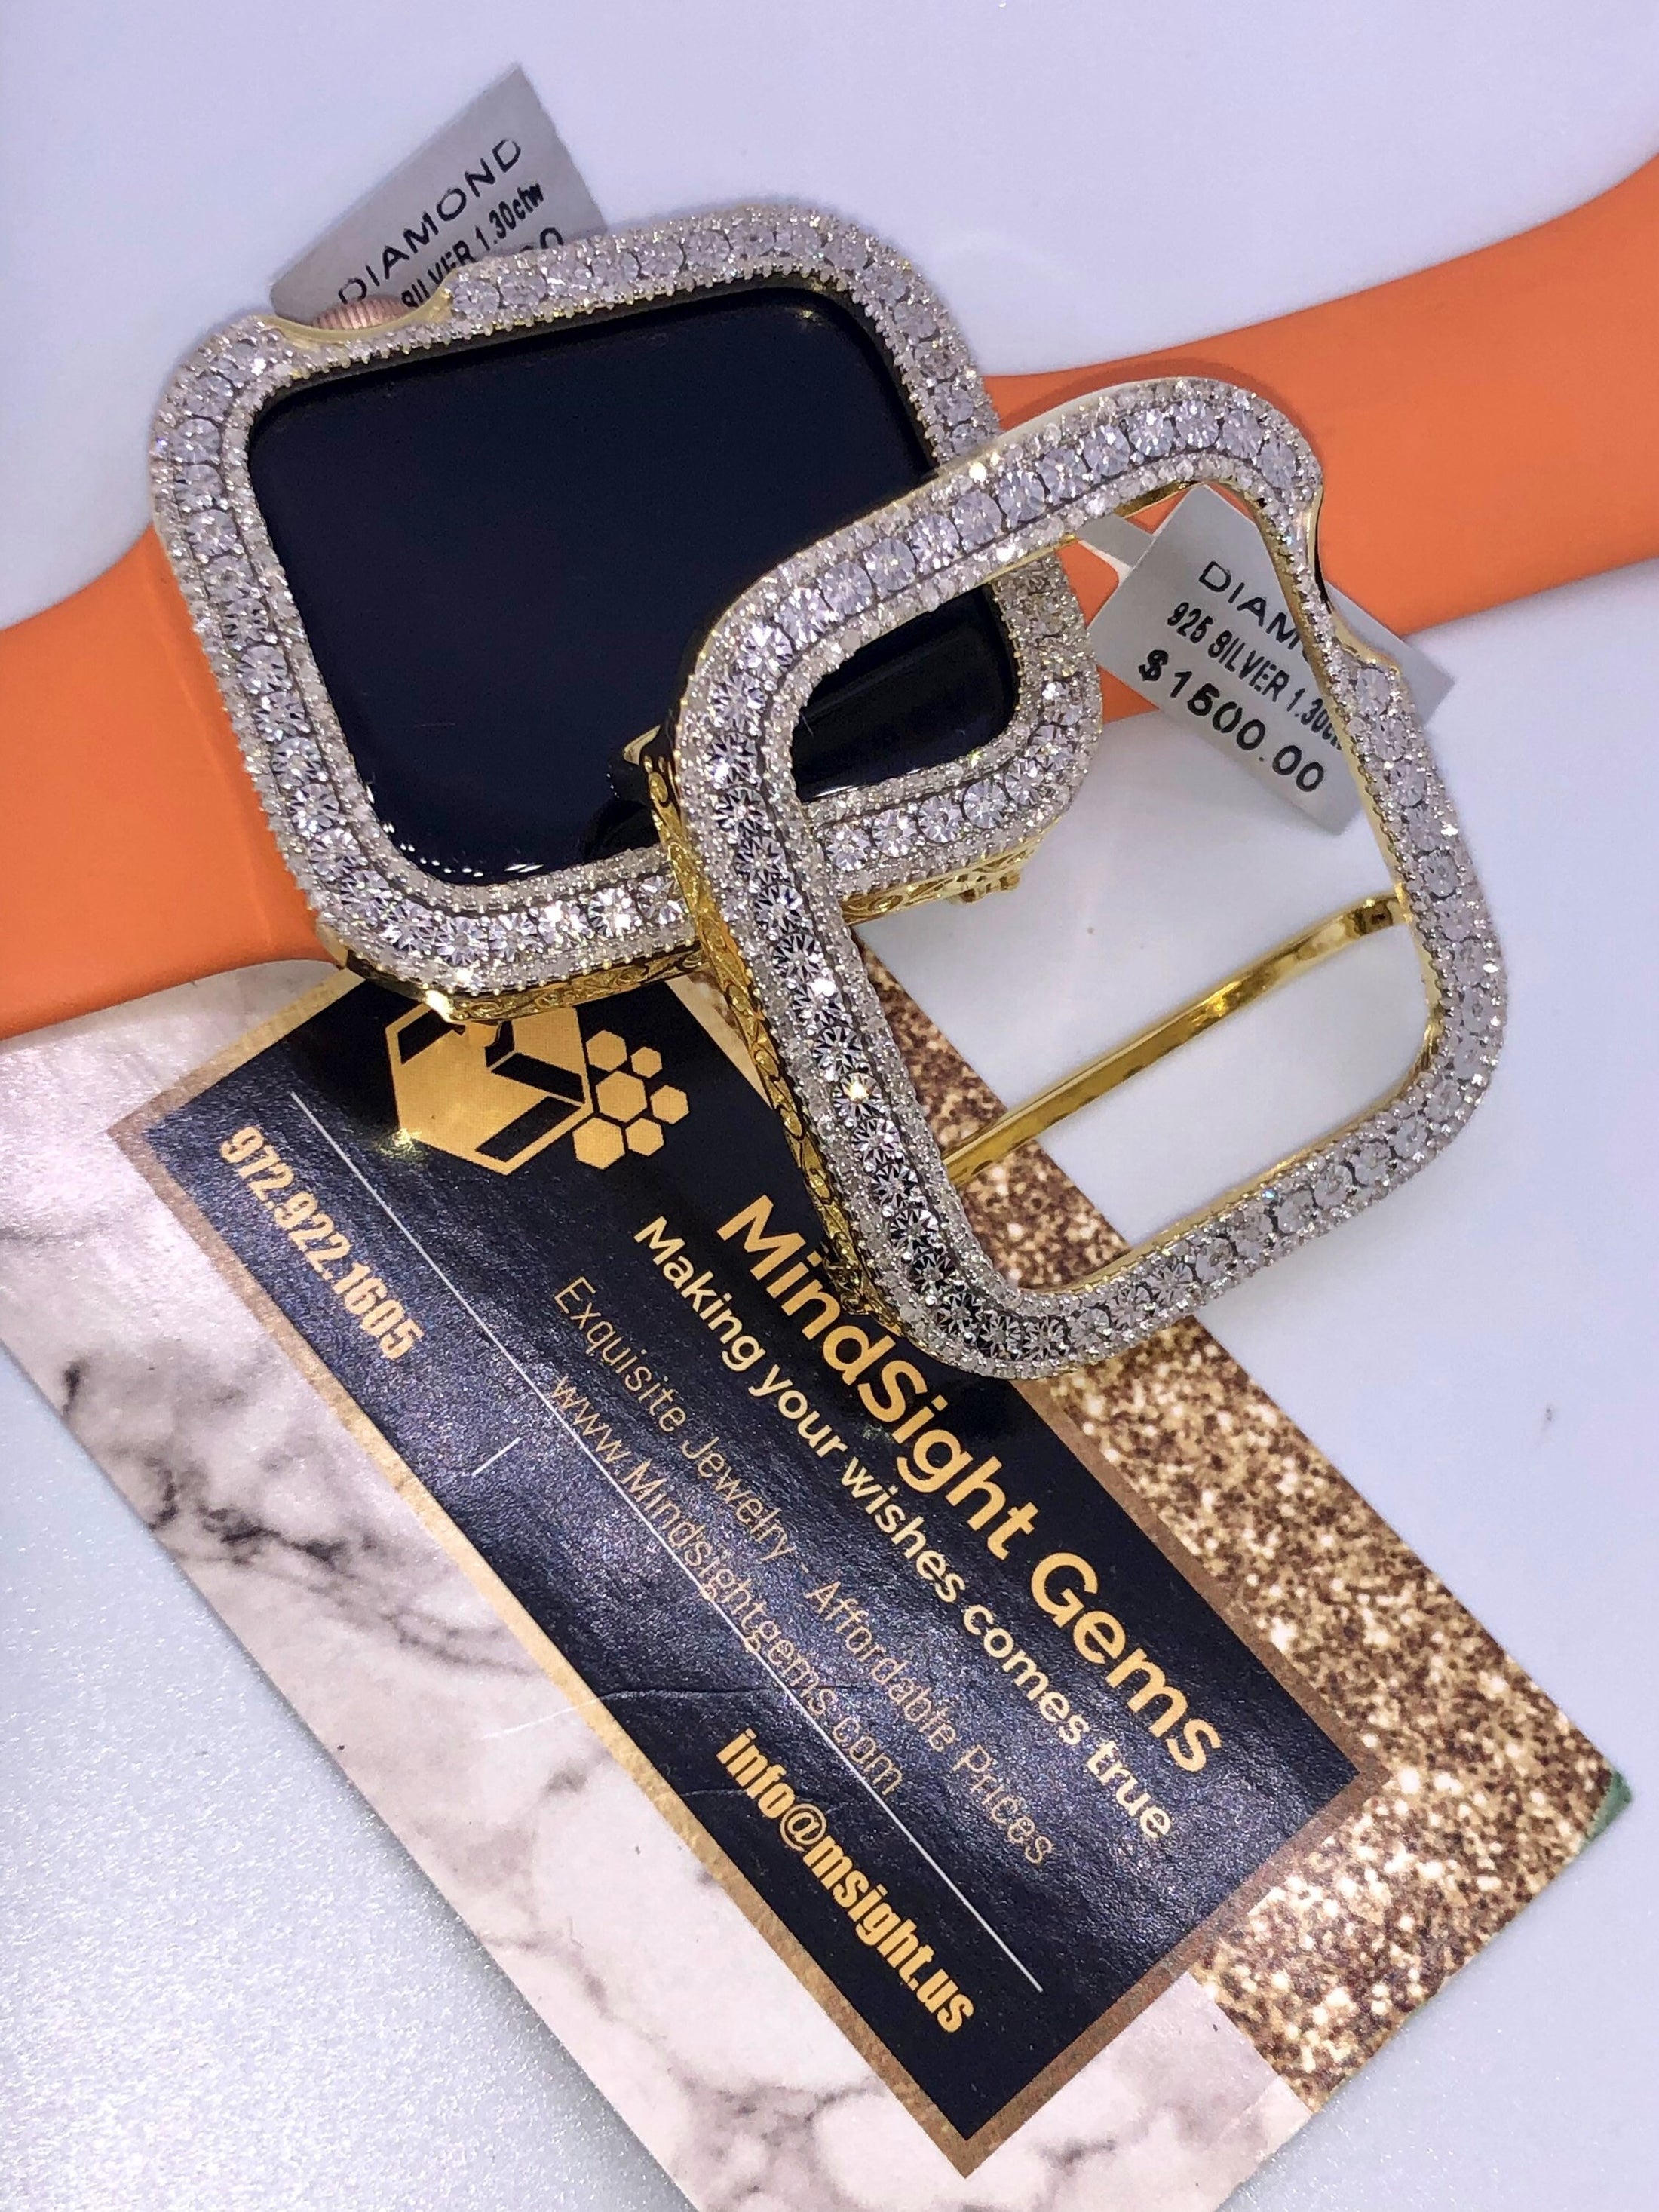 14k Gold Vermeil Real Genuine Authentic Diamond Apple Watch Bezel Series 4,5,6,7,8, ALL Sizes NOT Lab Made 100% Real Diamonds, new series